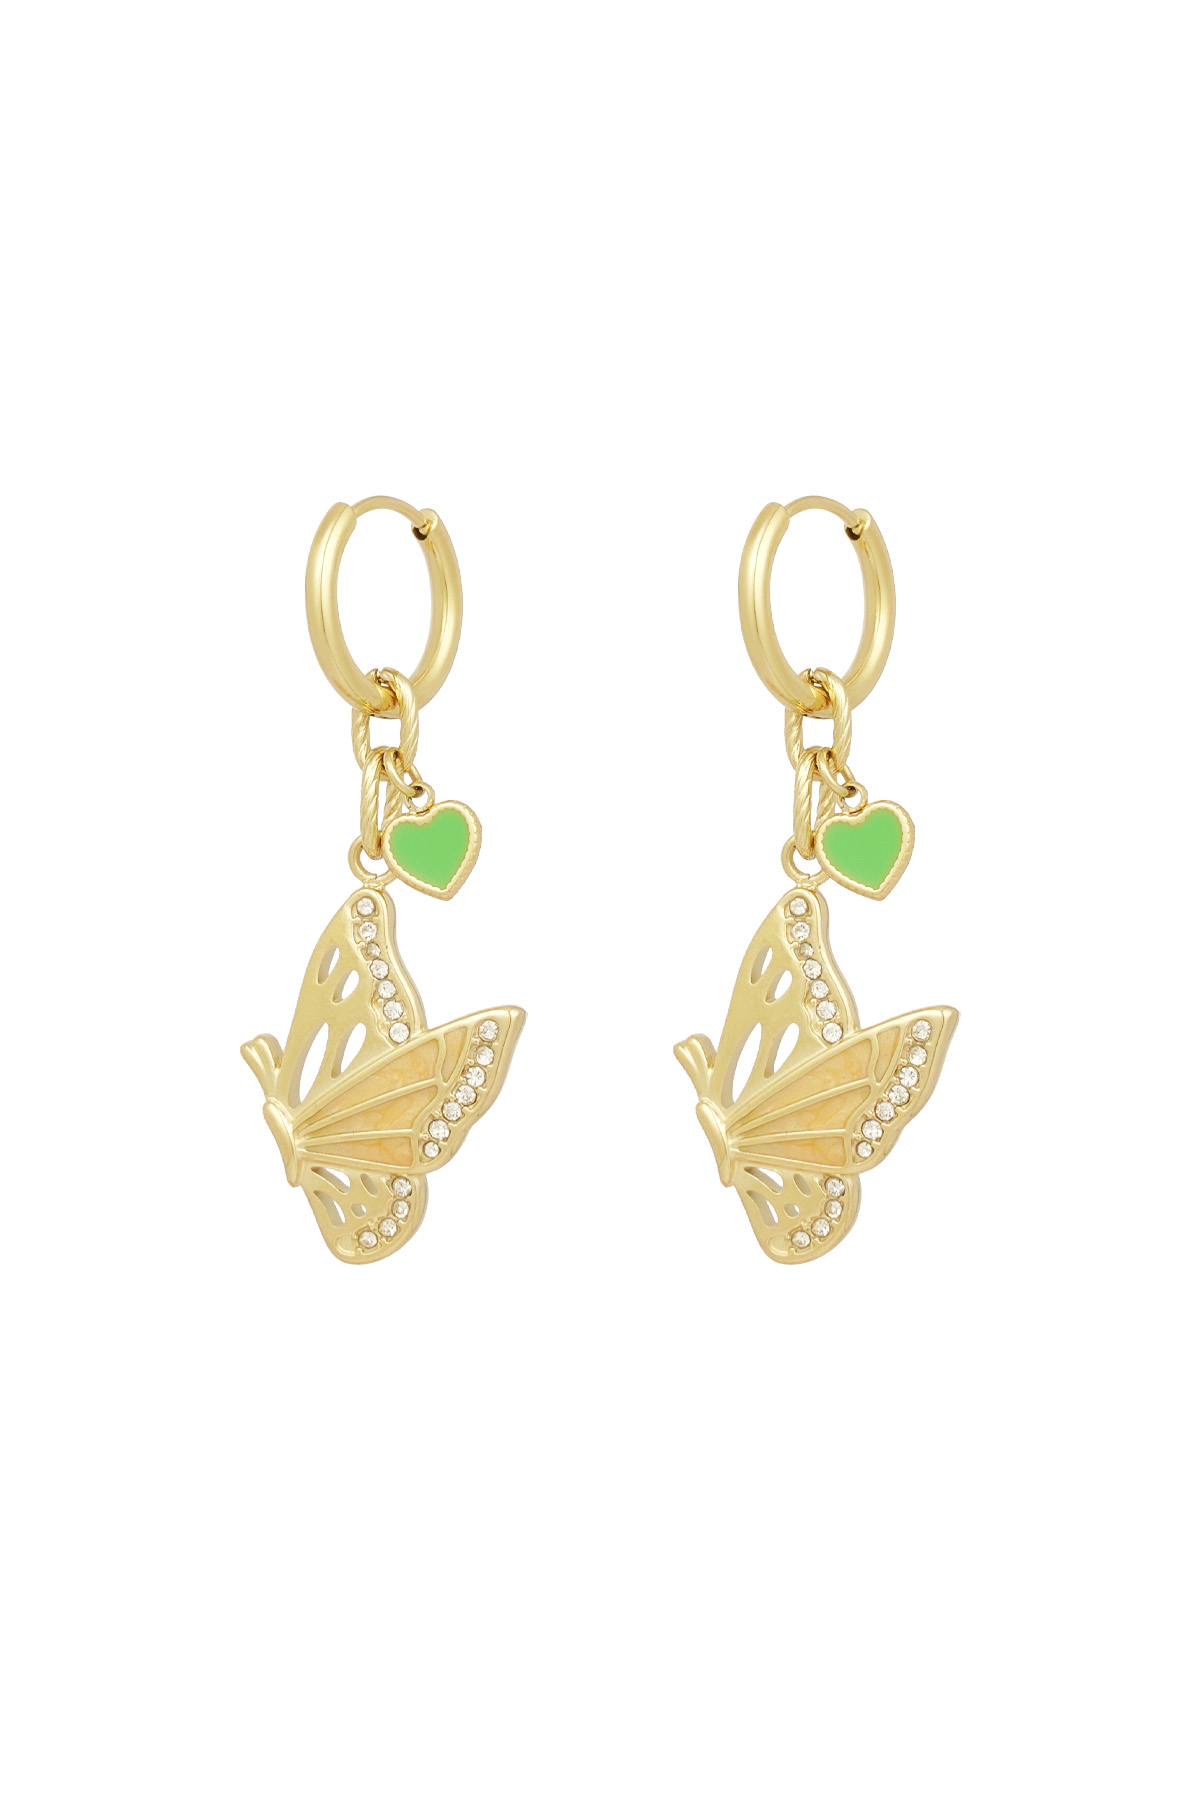 Earrings butterfly vision - gold h5 